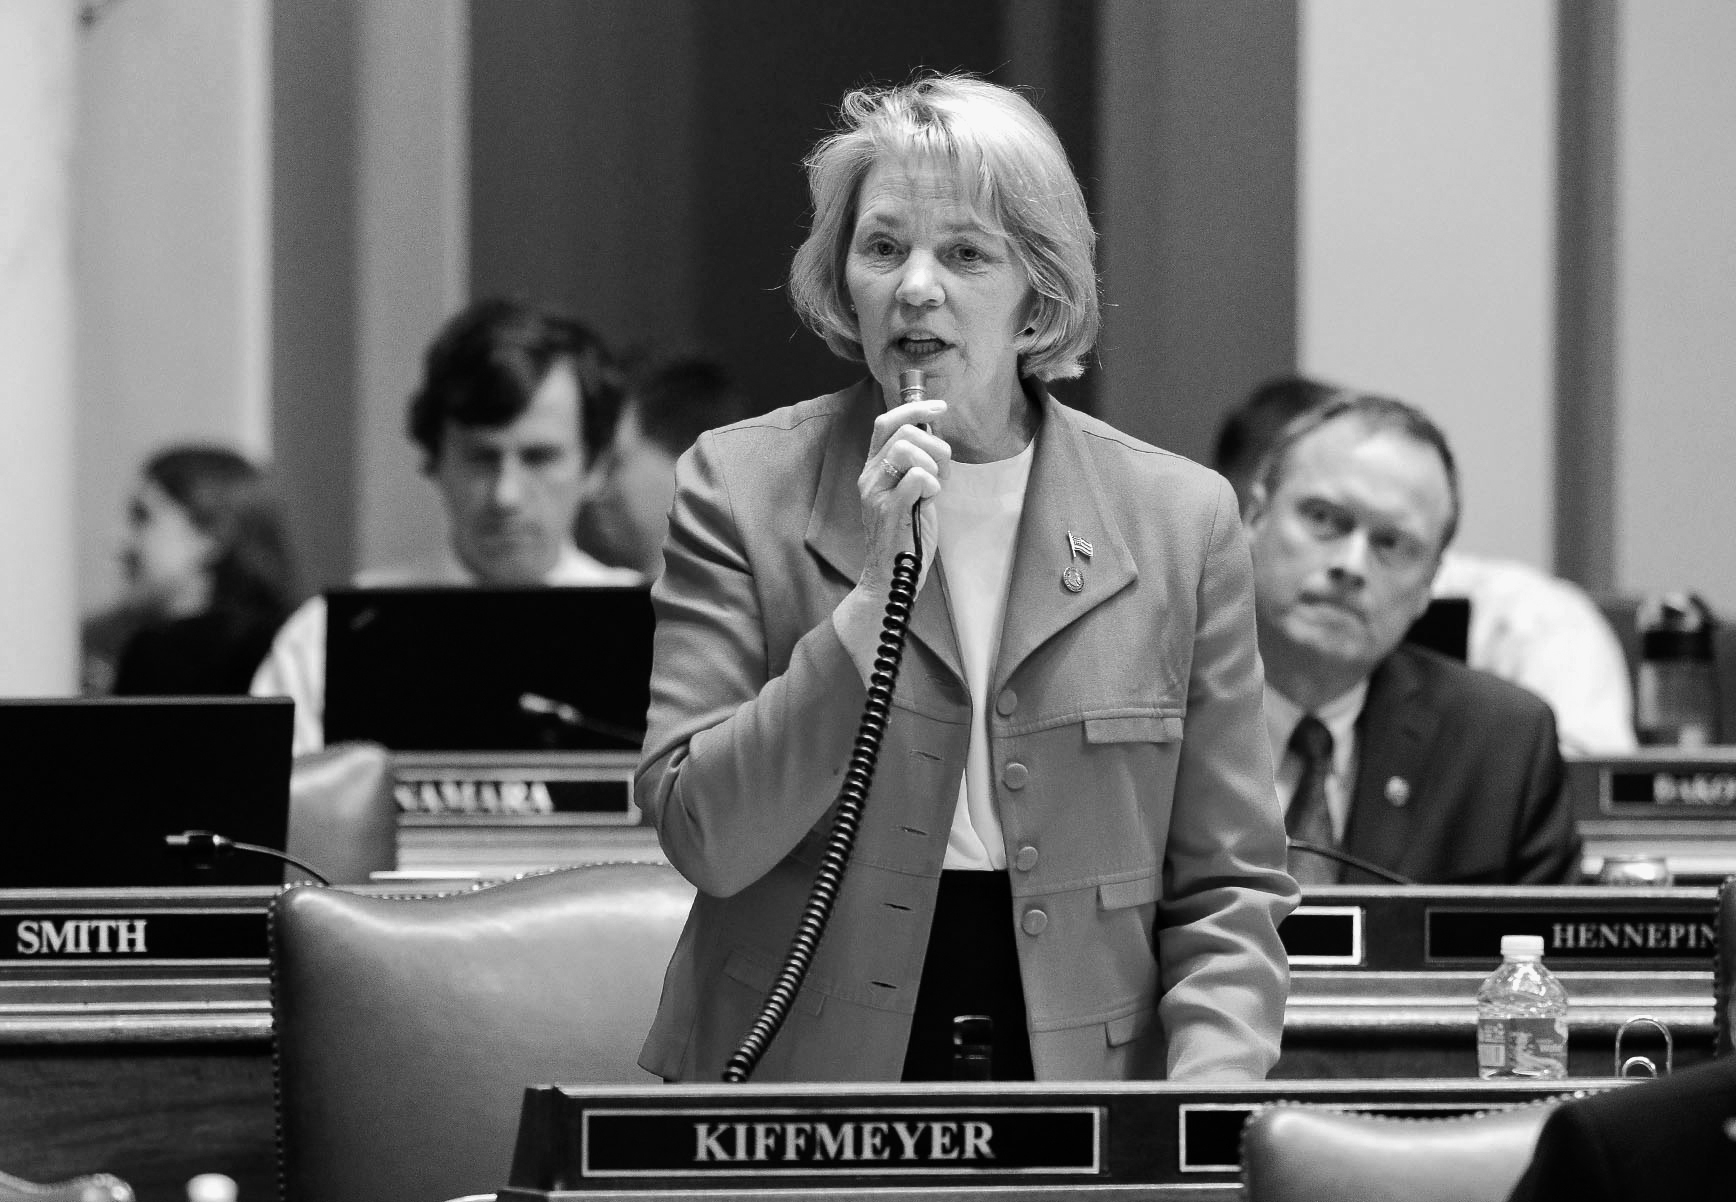 Rep. Mary Kiffmeyer considers her style to be clear and methodical � bringing opposing sides together. (Photo by Andrew VonBank)